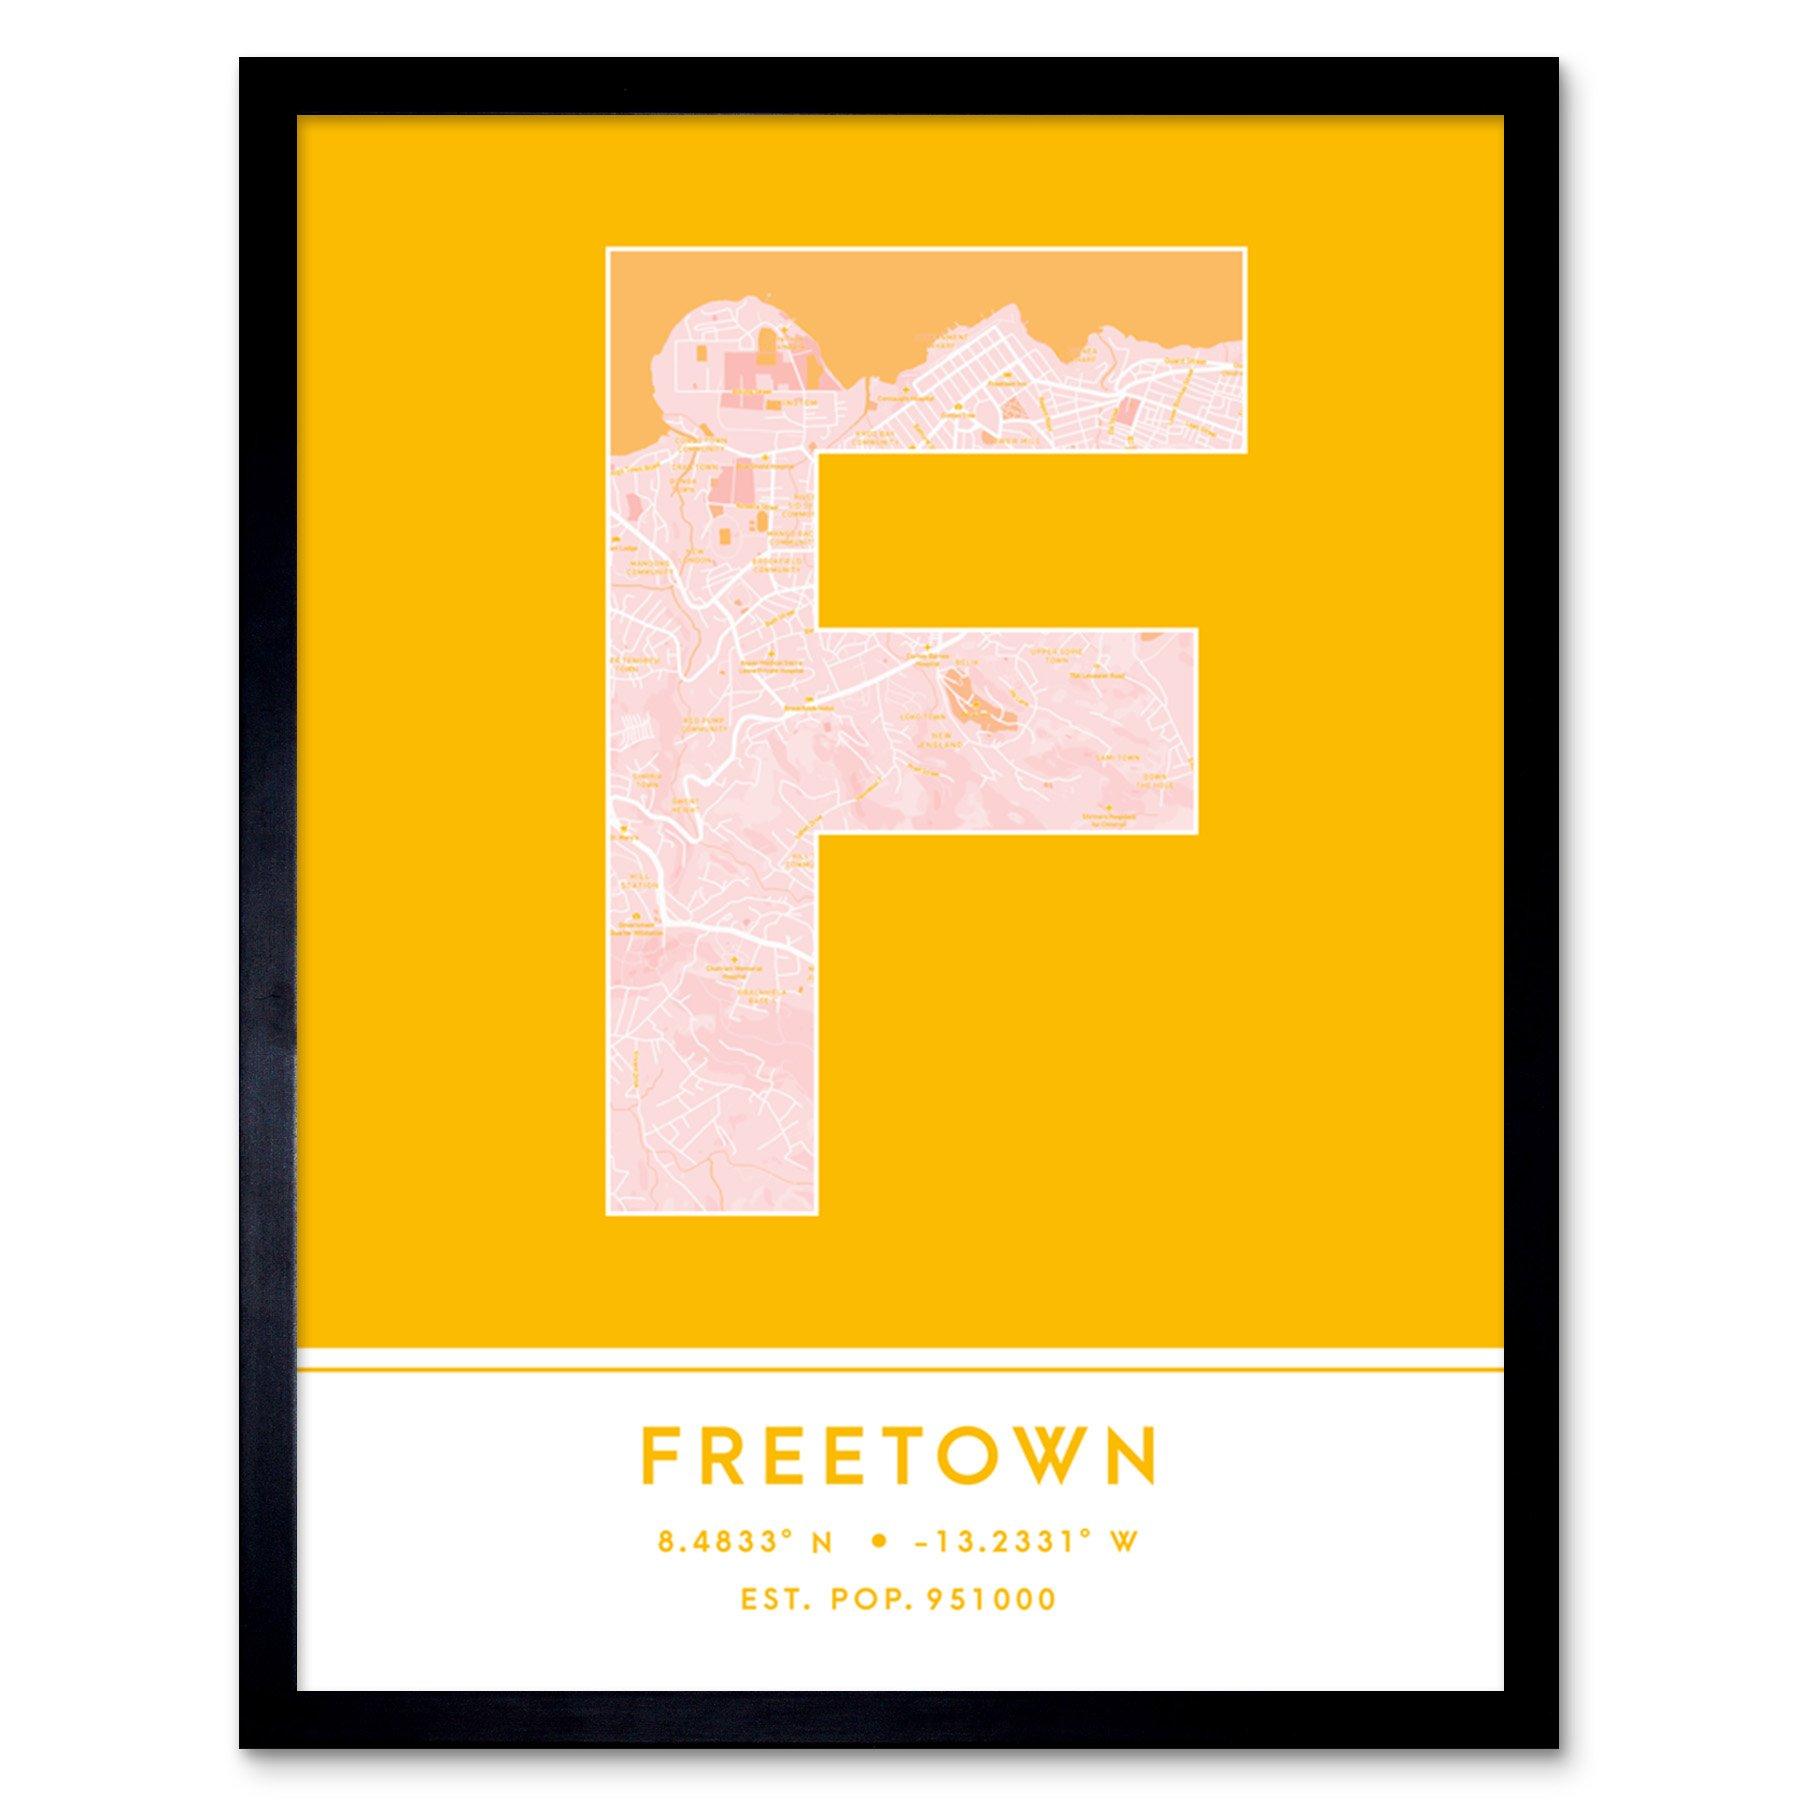 Freetown Sierra Leone City Map Modern Typography Stylish Letter Framed Word Wall Art Print Poster for Home Décor